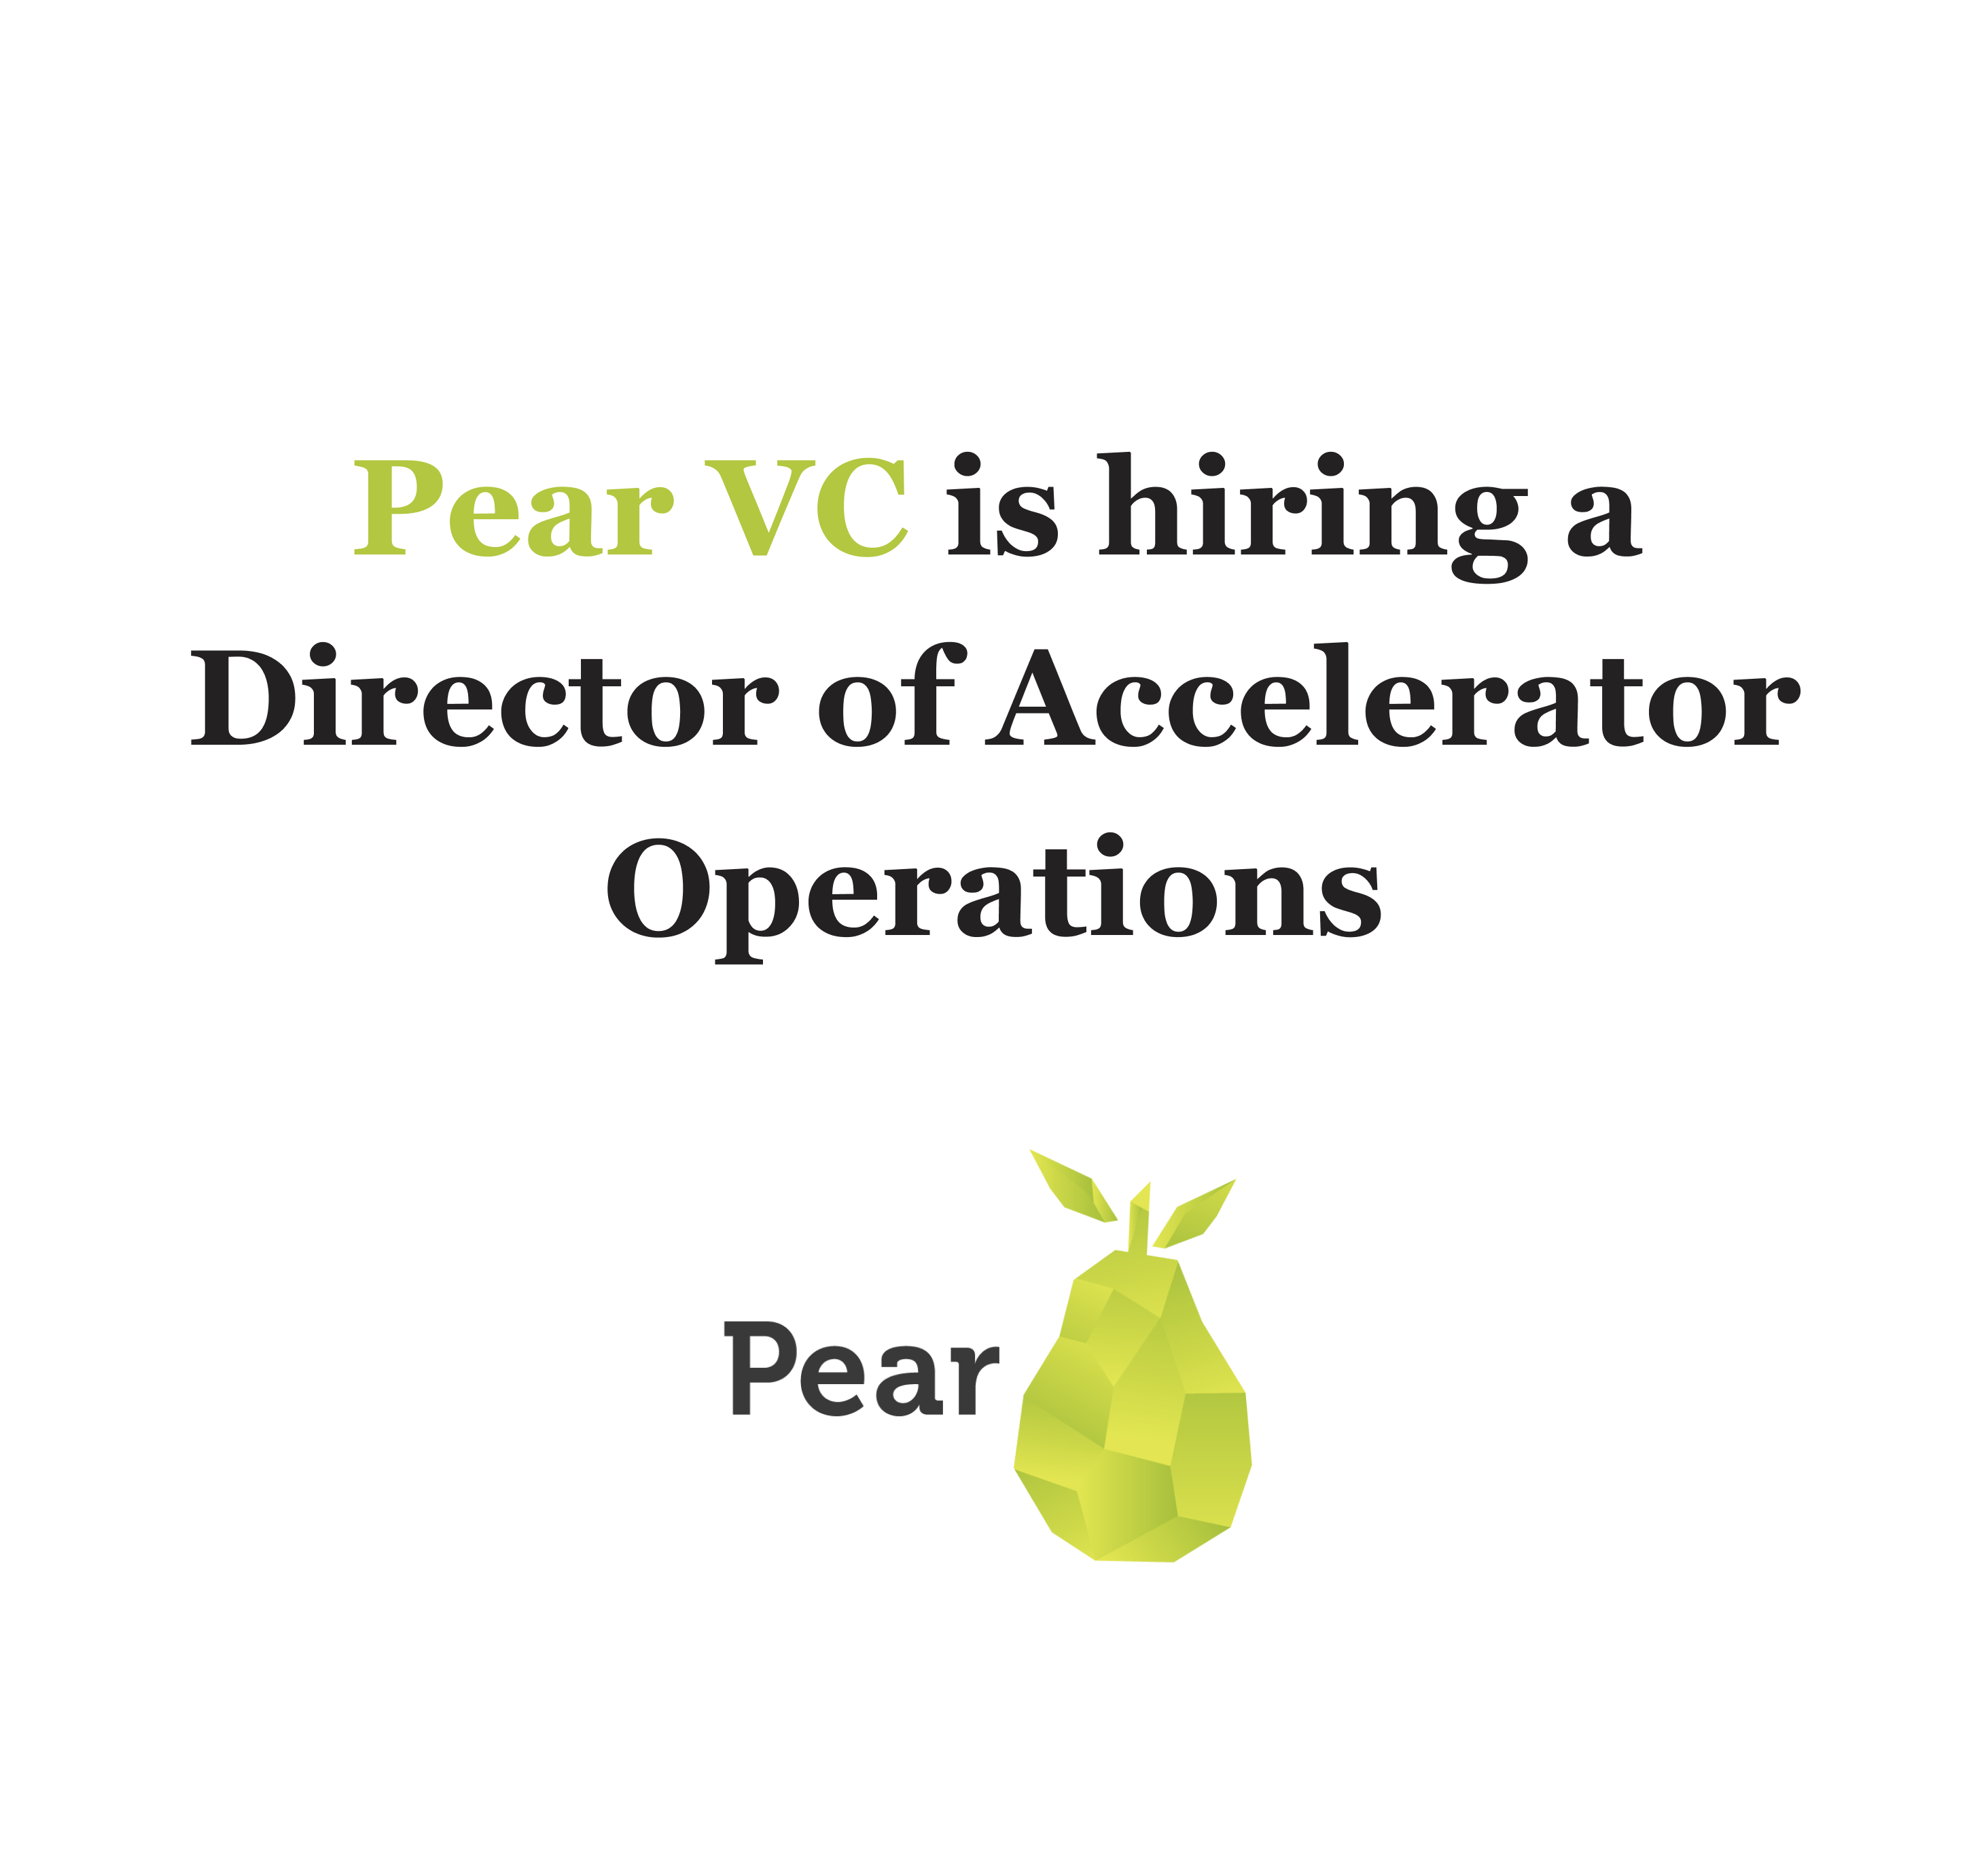 Come join Pear as our Director of Accelerator Operations!